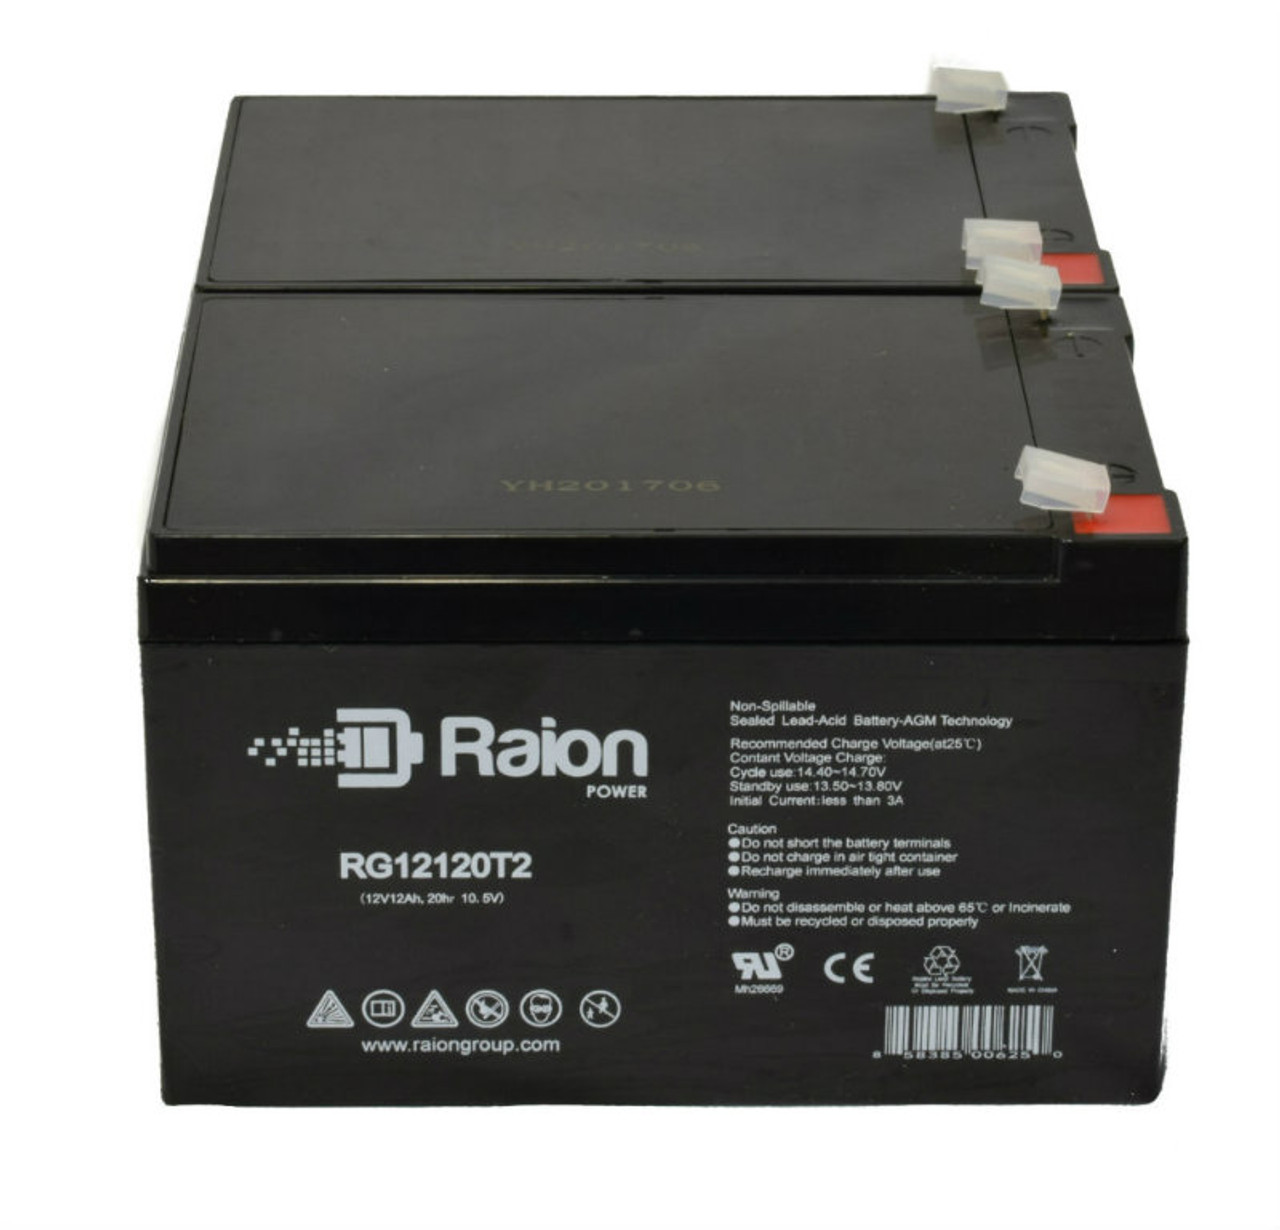 Raion Power 12V 12Ah Non-Spillable Compatible Replacement Battery for SIGA S15-12 - (2 Pack)